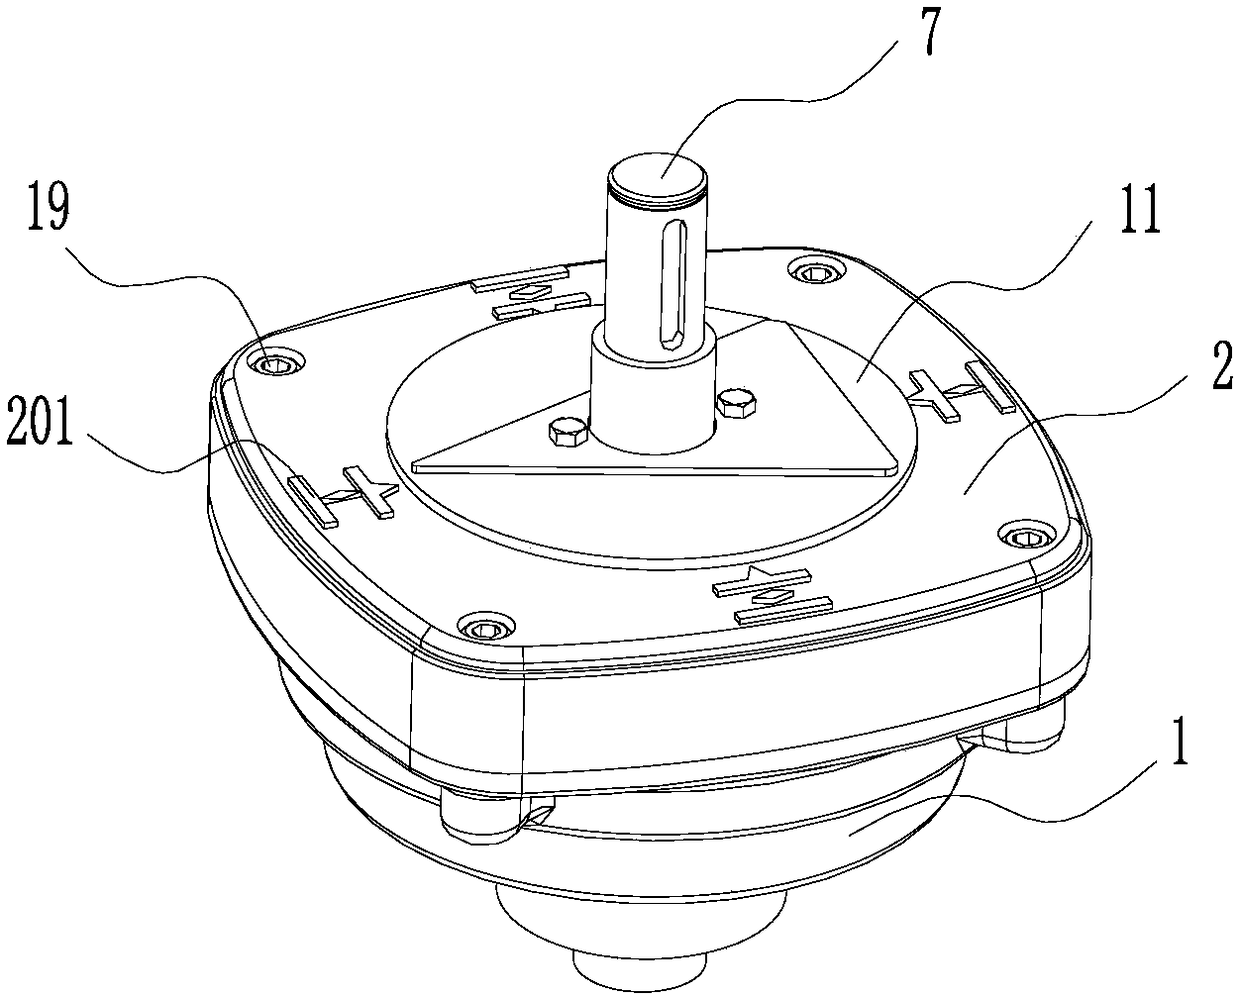 A double-indicating device for angular strokes for butterfly valves